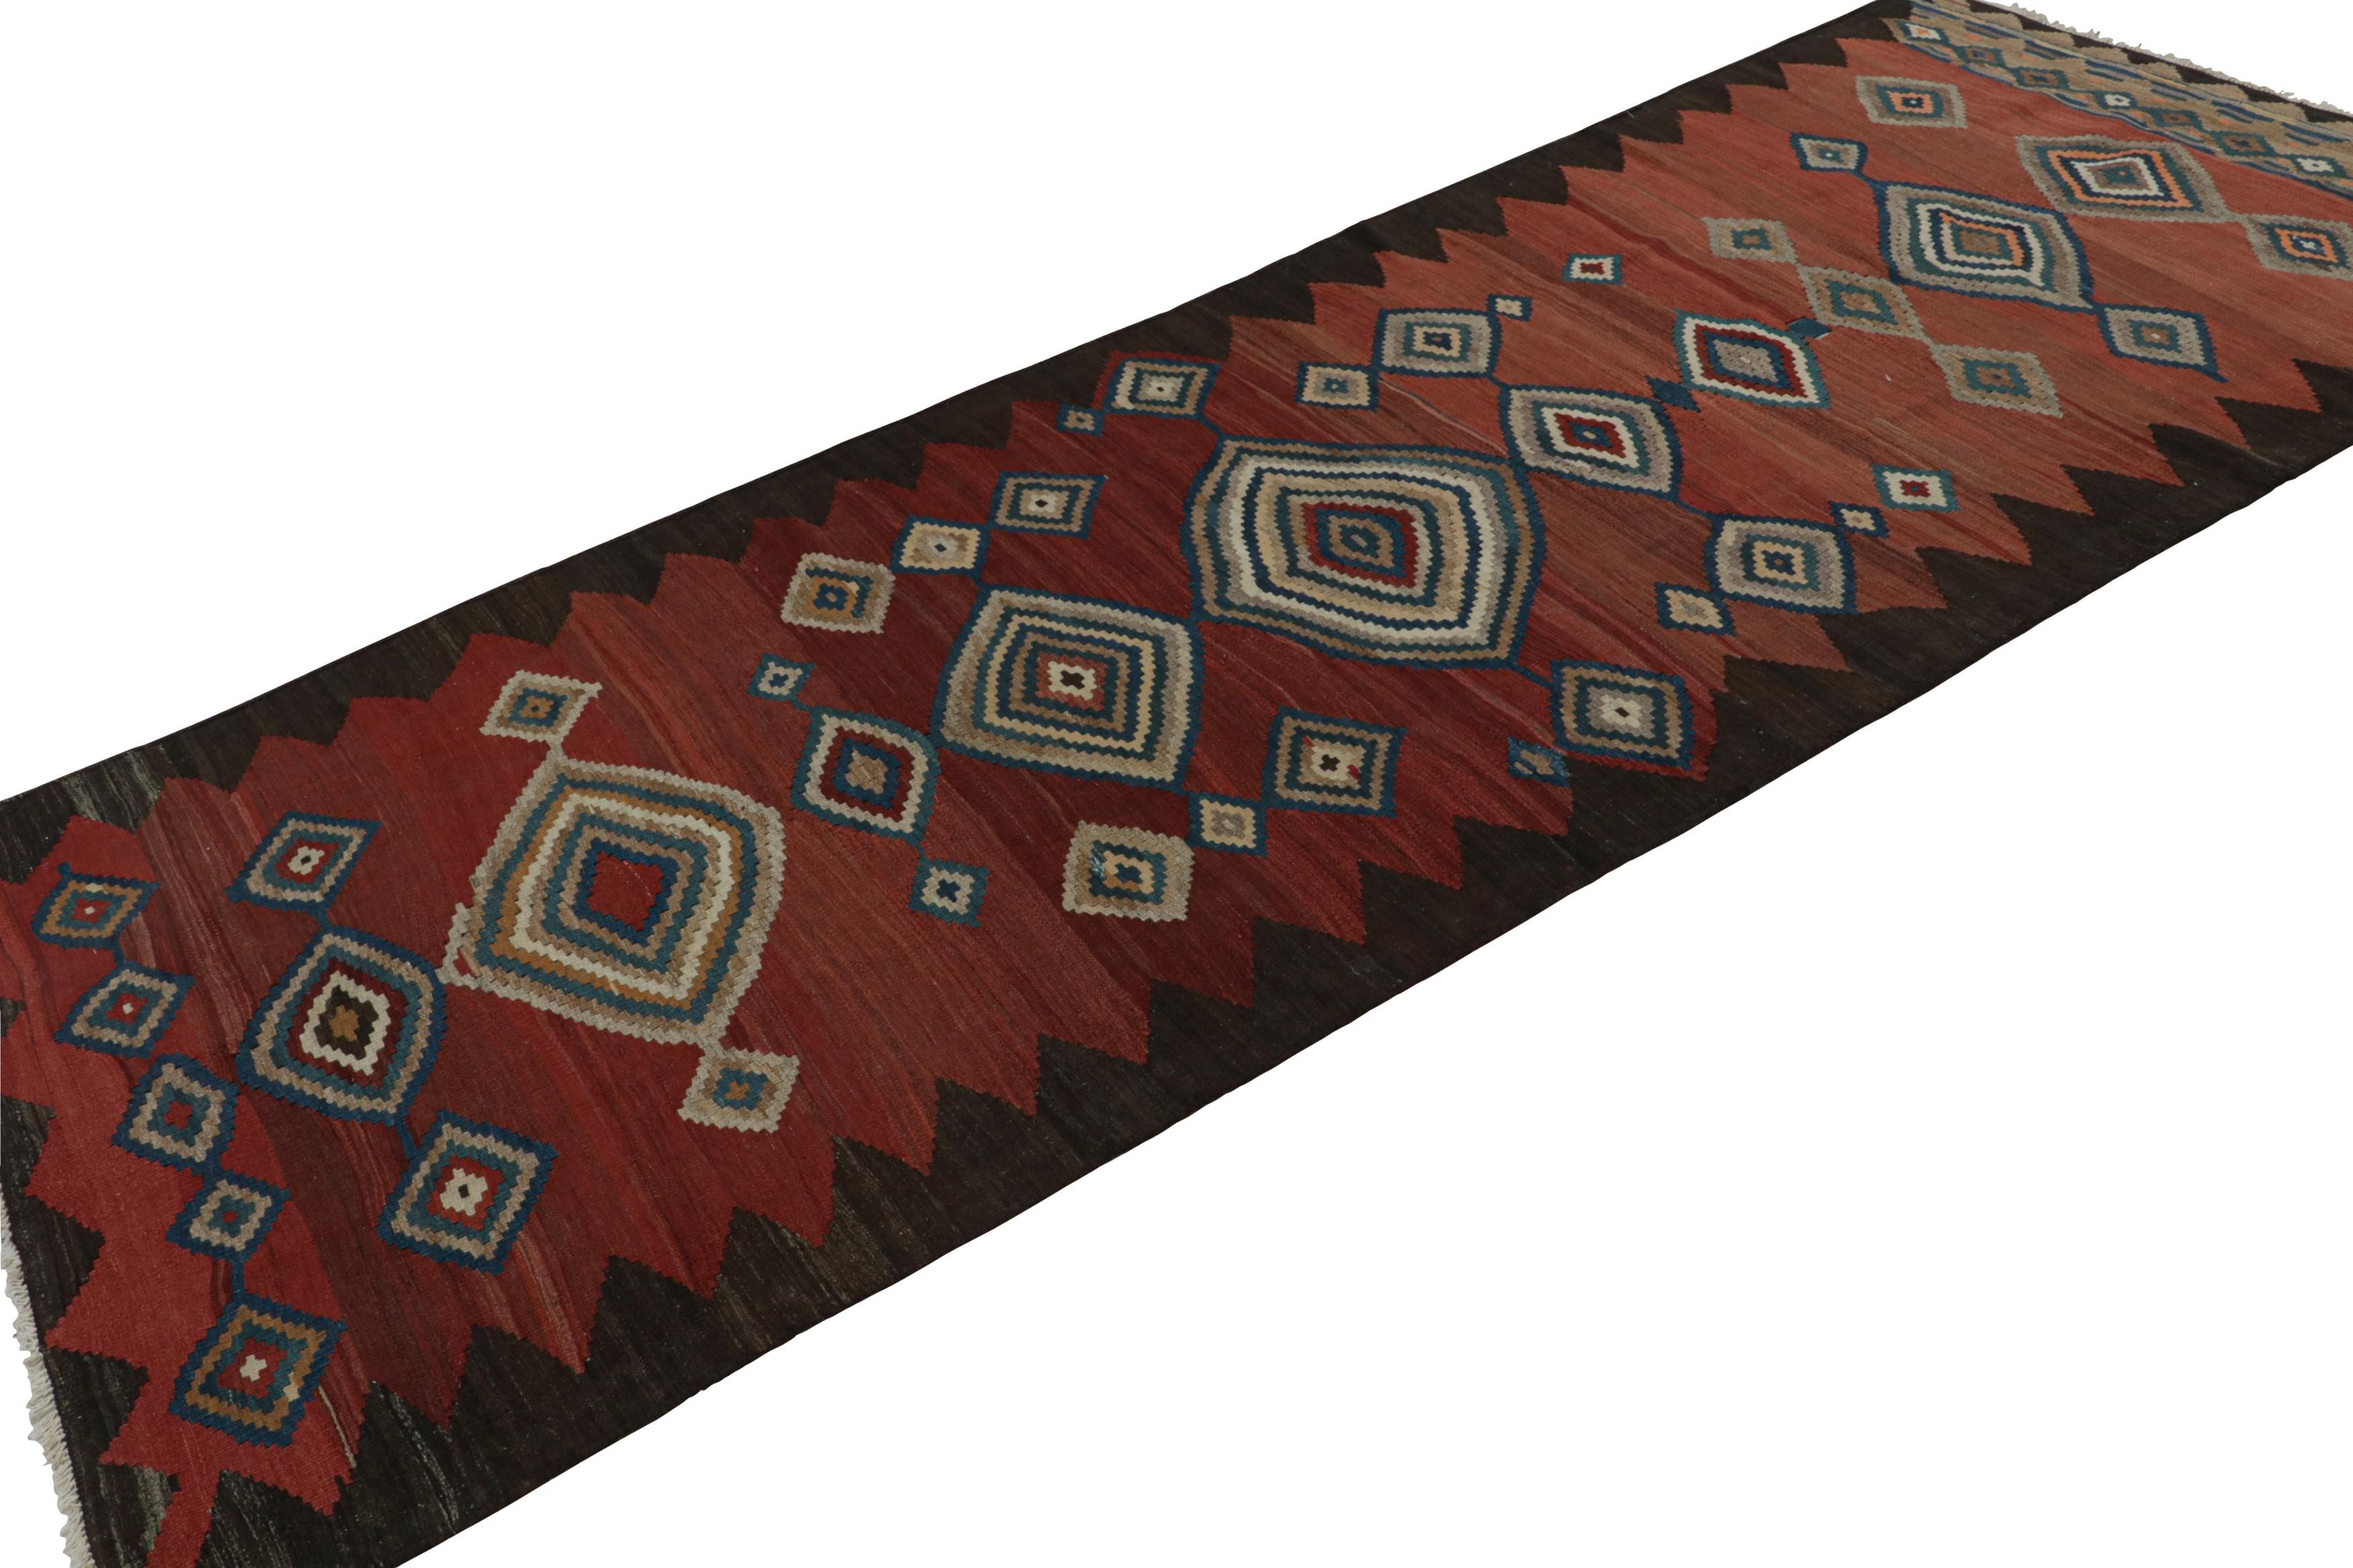 Handwoven in wool, circa 1950-1960, this 5x12 vintage tribal Afghan kilim runner rug features vibrant medallions and geometric patterns in red, blue, beige/brown and black. 

On the design: 

A special piece in the Rug & Kilim collection, this